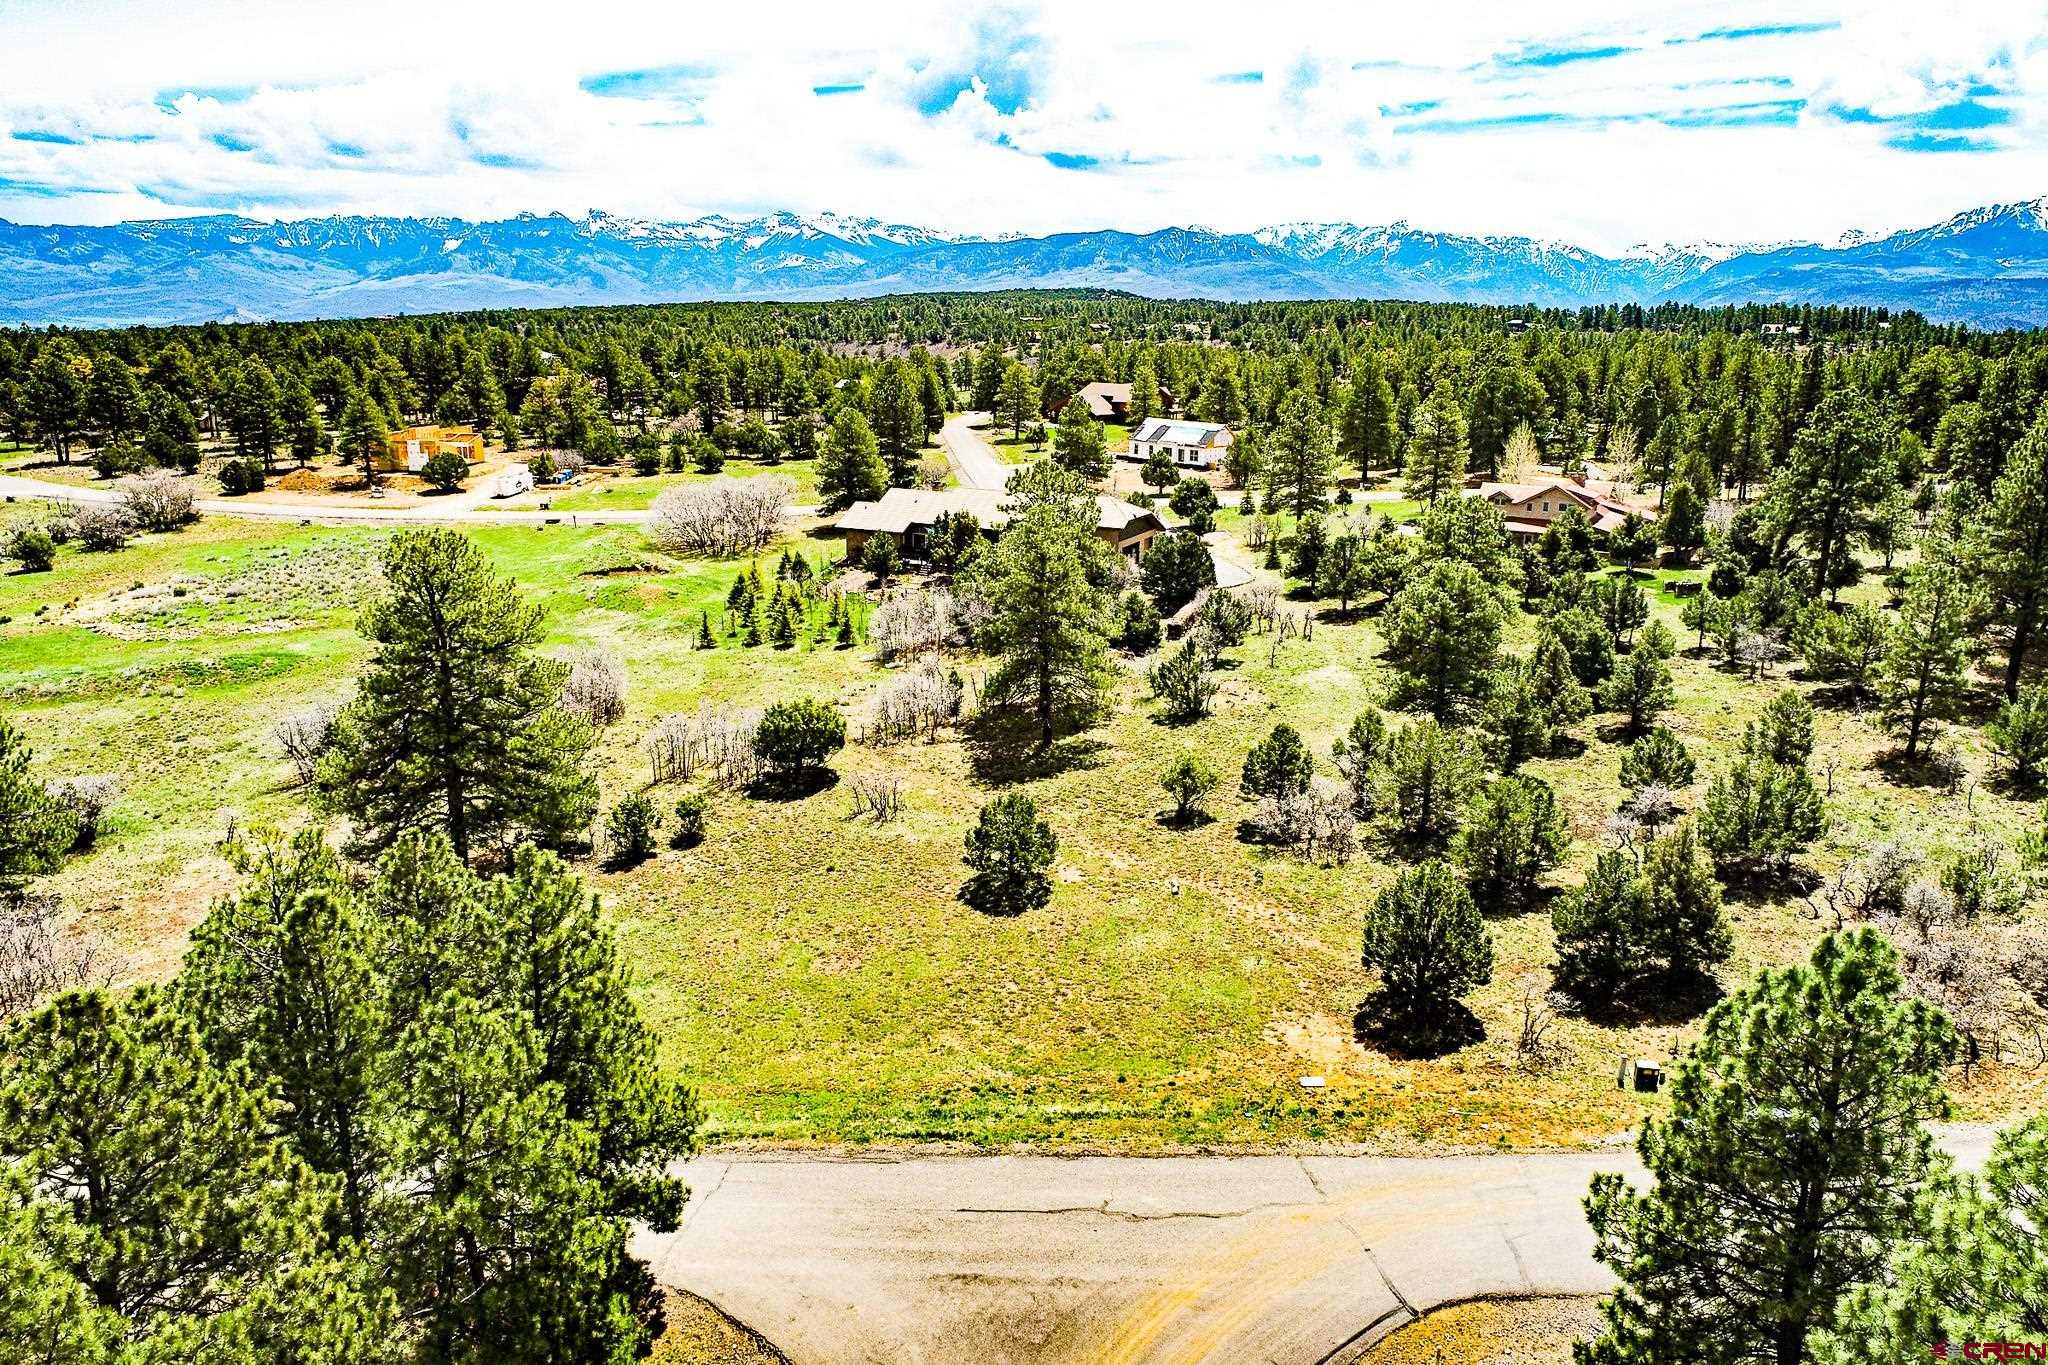 This tranquil and picturesque lot in the mountainous region of Colorado is a superb location to build your dream home. The lot, spanning less than an acre, is situated in the Divide Ranch and Golf Club Subdivision's Fairway Pines Estates, adorned by Ponderosa Pine trees. With its proximity to the clubhouse and a competitive price, this is a great opportunity to build your dream home on a prime, easy-to-build-on lot. The Divide Ranch, located on Log Hill Mesa, is a short drive from downtown Ridgway, a 30-minute drive from Montrose, and 45 minutes from Telluride, providing an ideal location for all your recreational activities. Moreover, the property's location offers a sense of peace and seclusion that is characteristic of mountain living. Take advantage of this excellent opportunity to purchase property at an incredible price and discover why Divide Ranch is one of Western Colorado's best-kept secrets.  Note that the buyer will be responsible for paying the $3,000.00 golf membership transfer fee. All information is subject to change/error; Buyer(s) to verify.